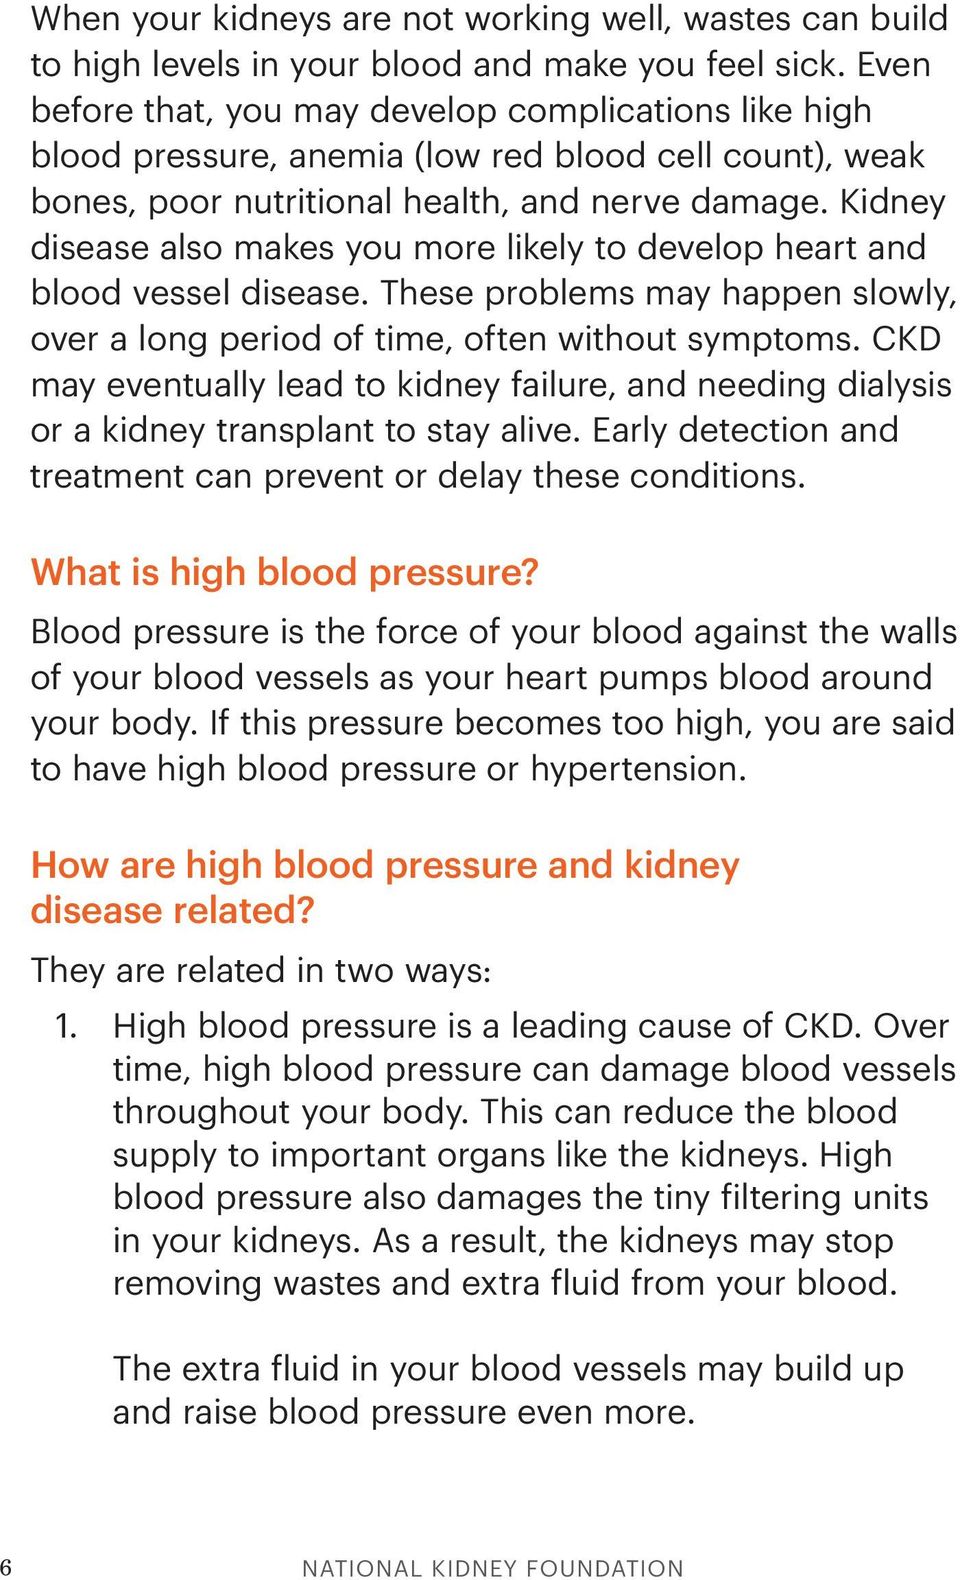 Kidney disease also makes you more likely to develop heart and blood vessel disease. These problems may happen slowly, over a long period of time, often without symptoms.